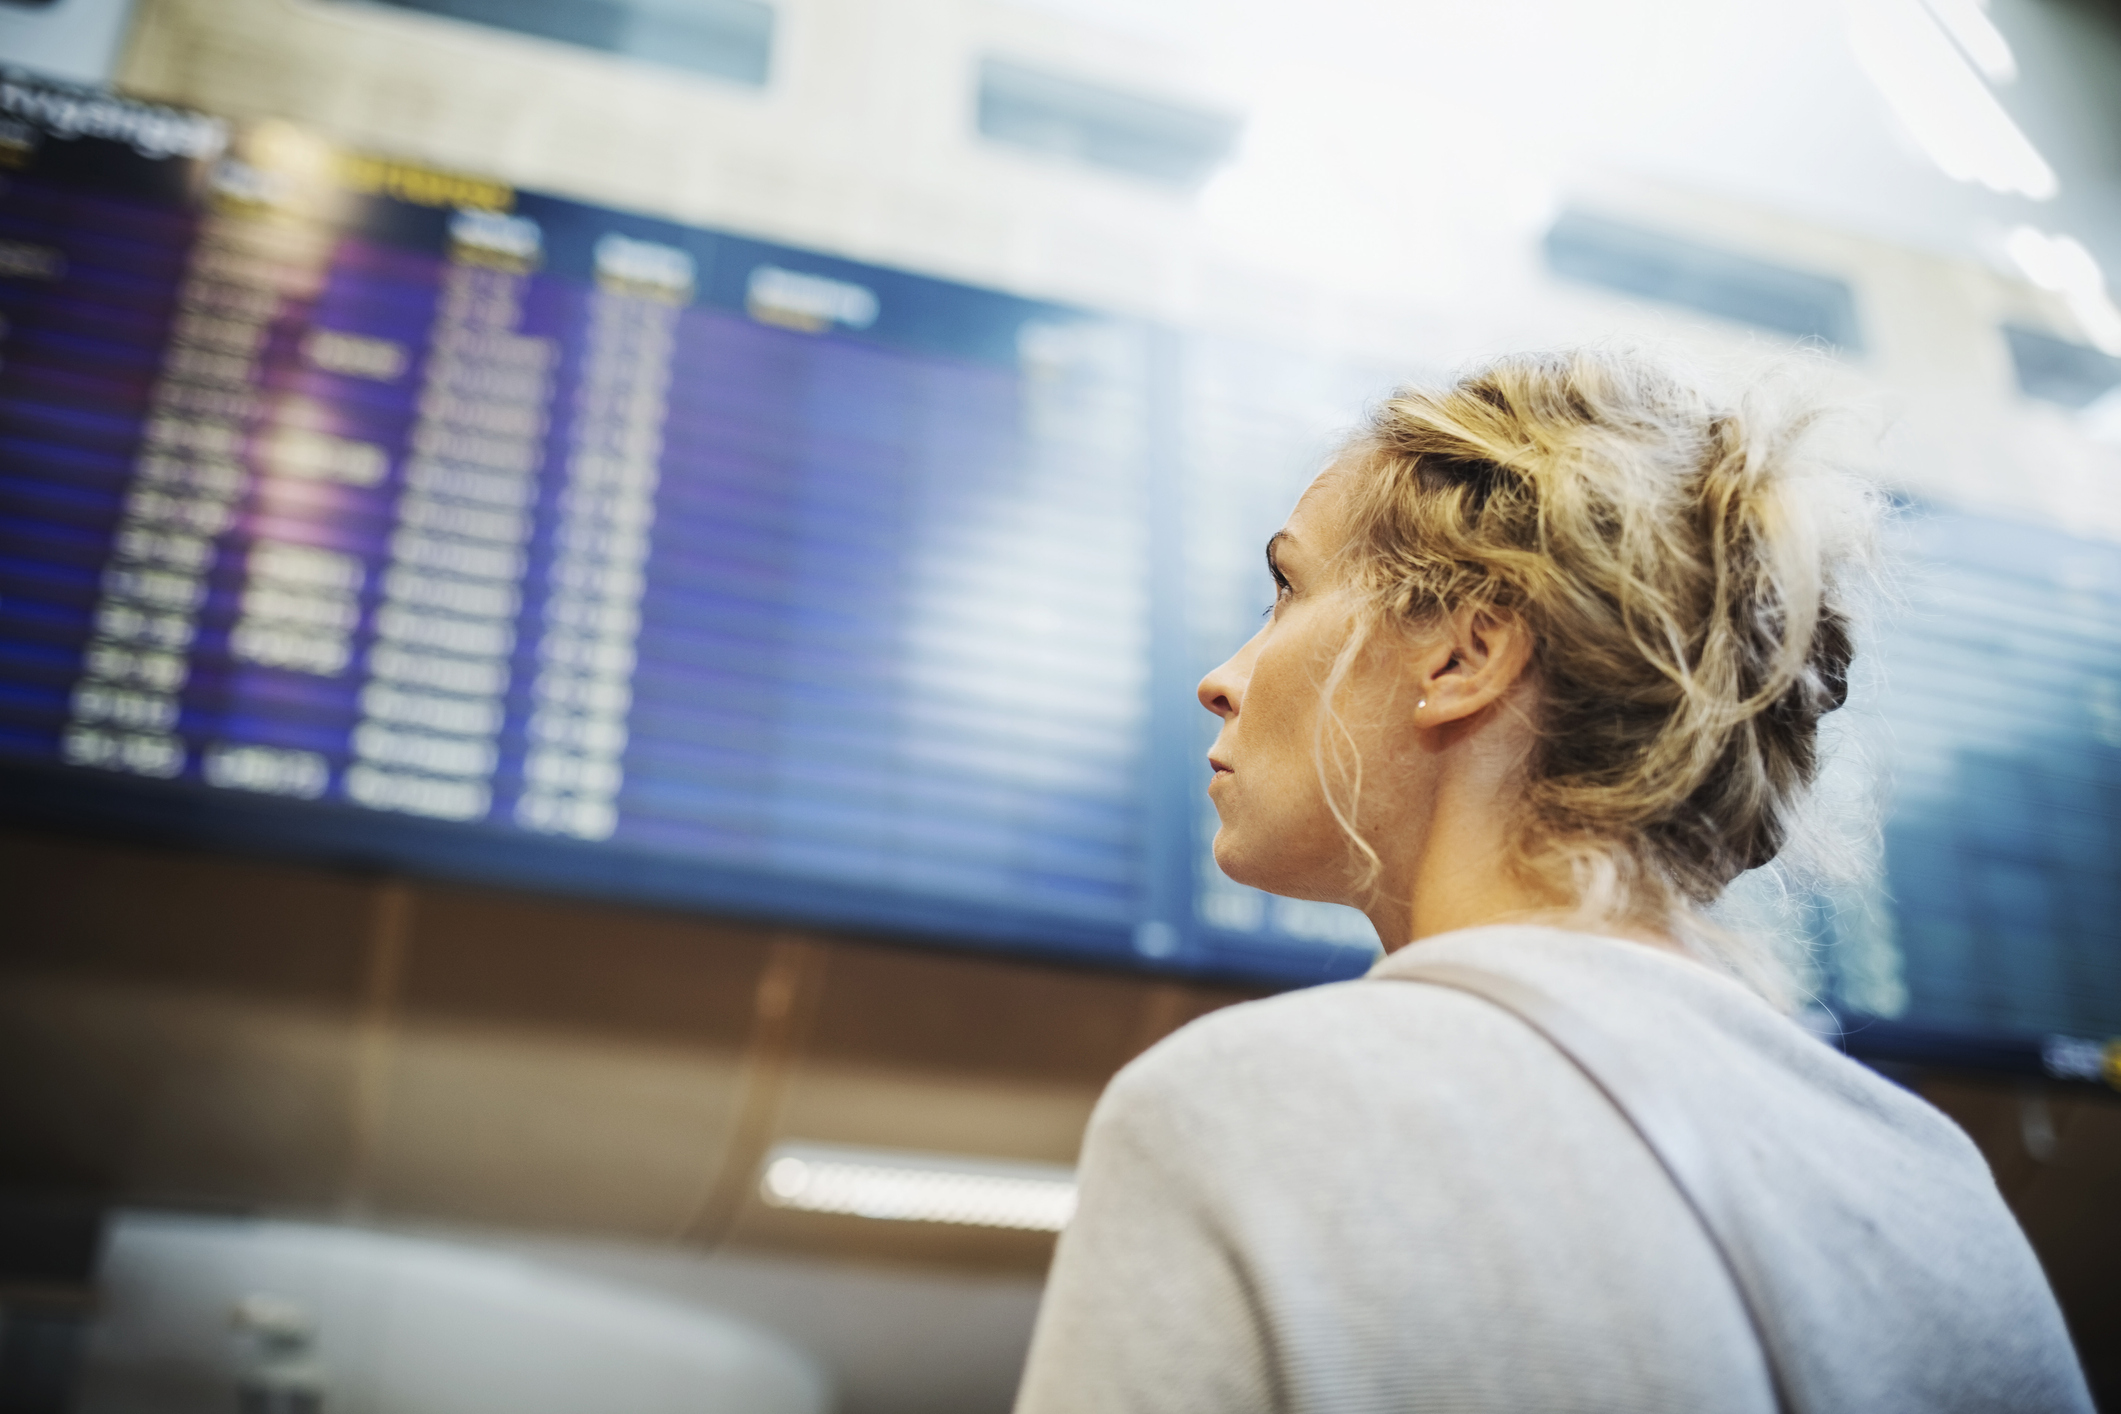 Strategic Business Travel: 5 Tips for Boosting Productivity and Savings